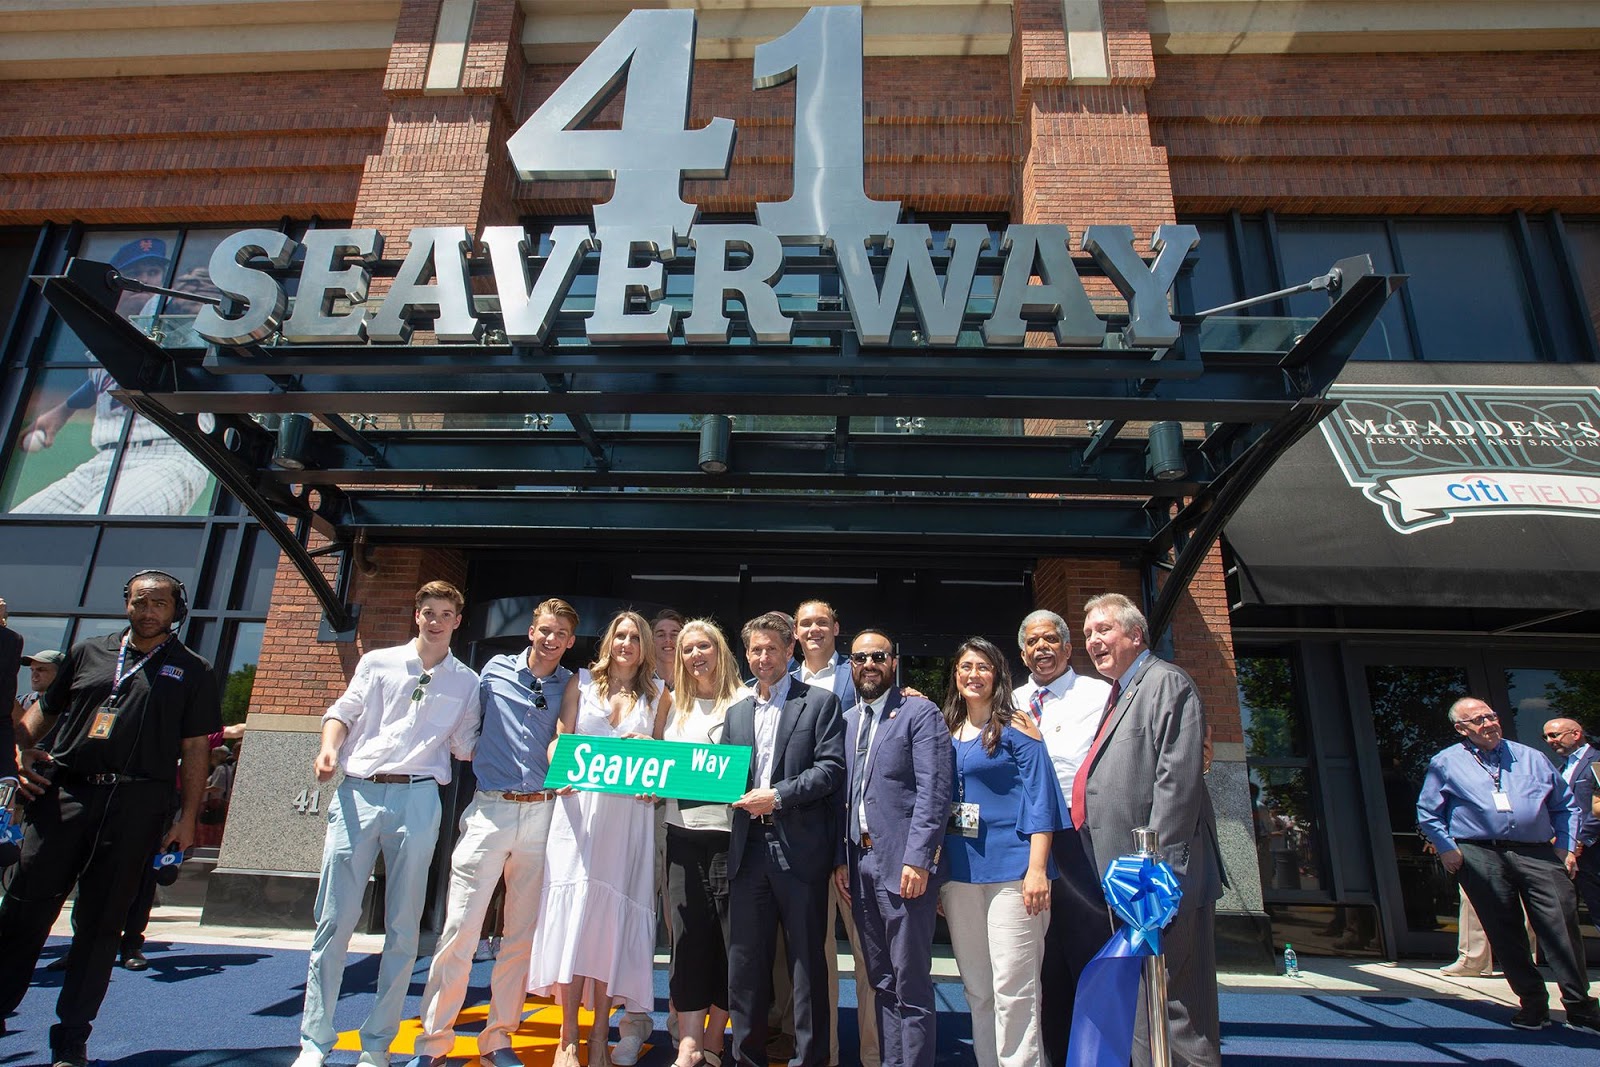 41 Tom Seaver Way Officially Named